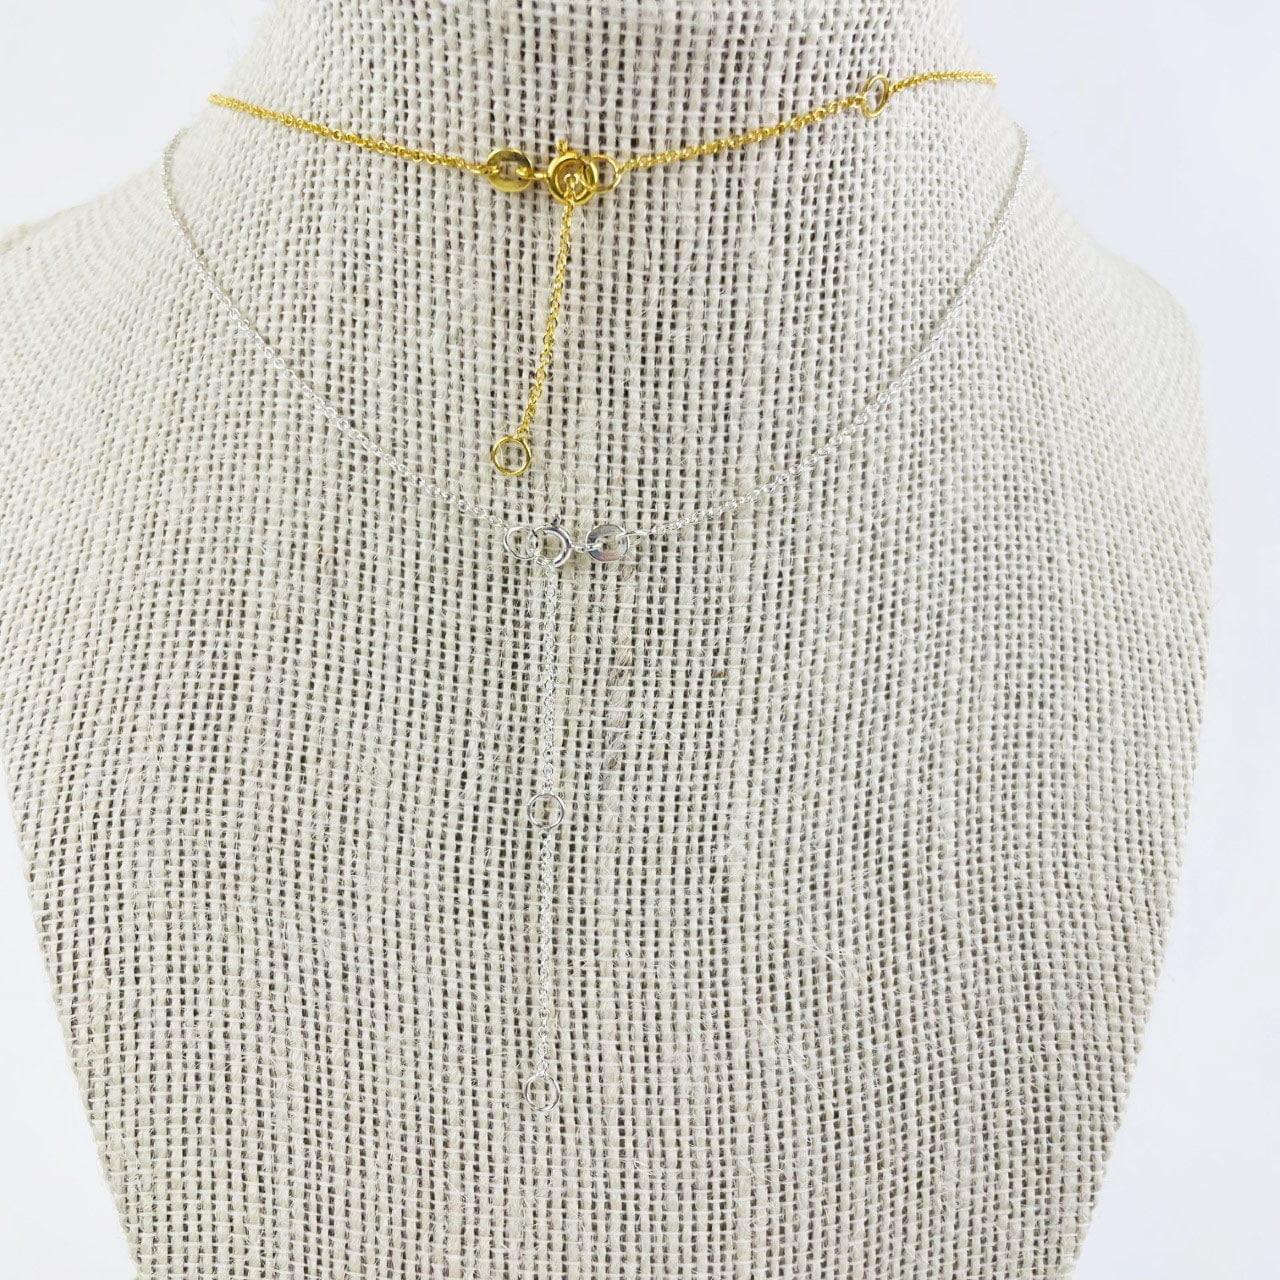 Necklaces from back showing clasps